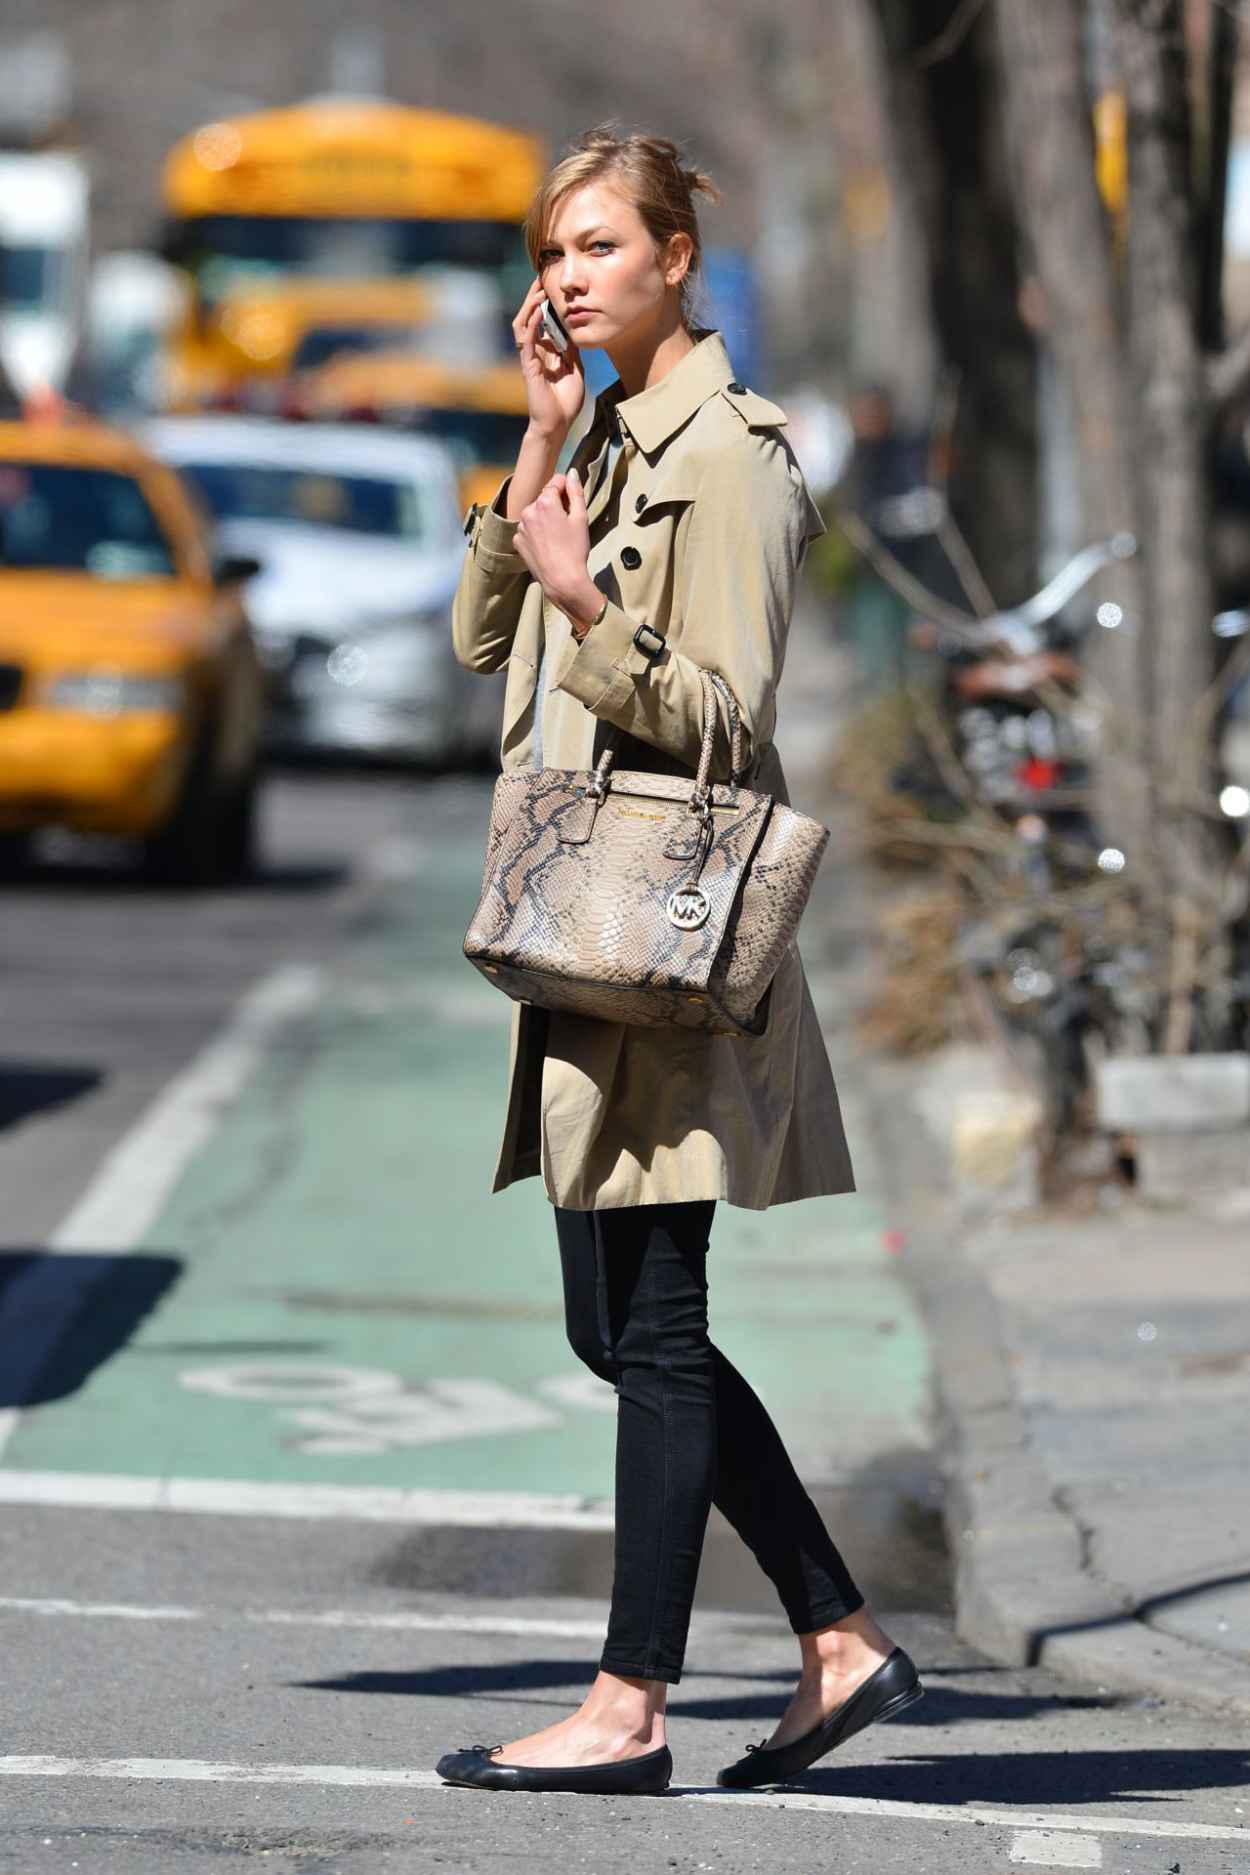 Karlie Kloss Casual Style - Out in NYC - March 2015-1